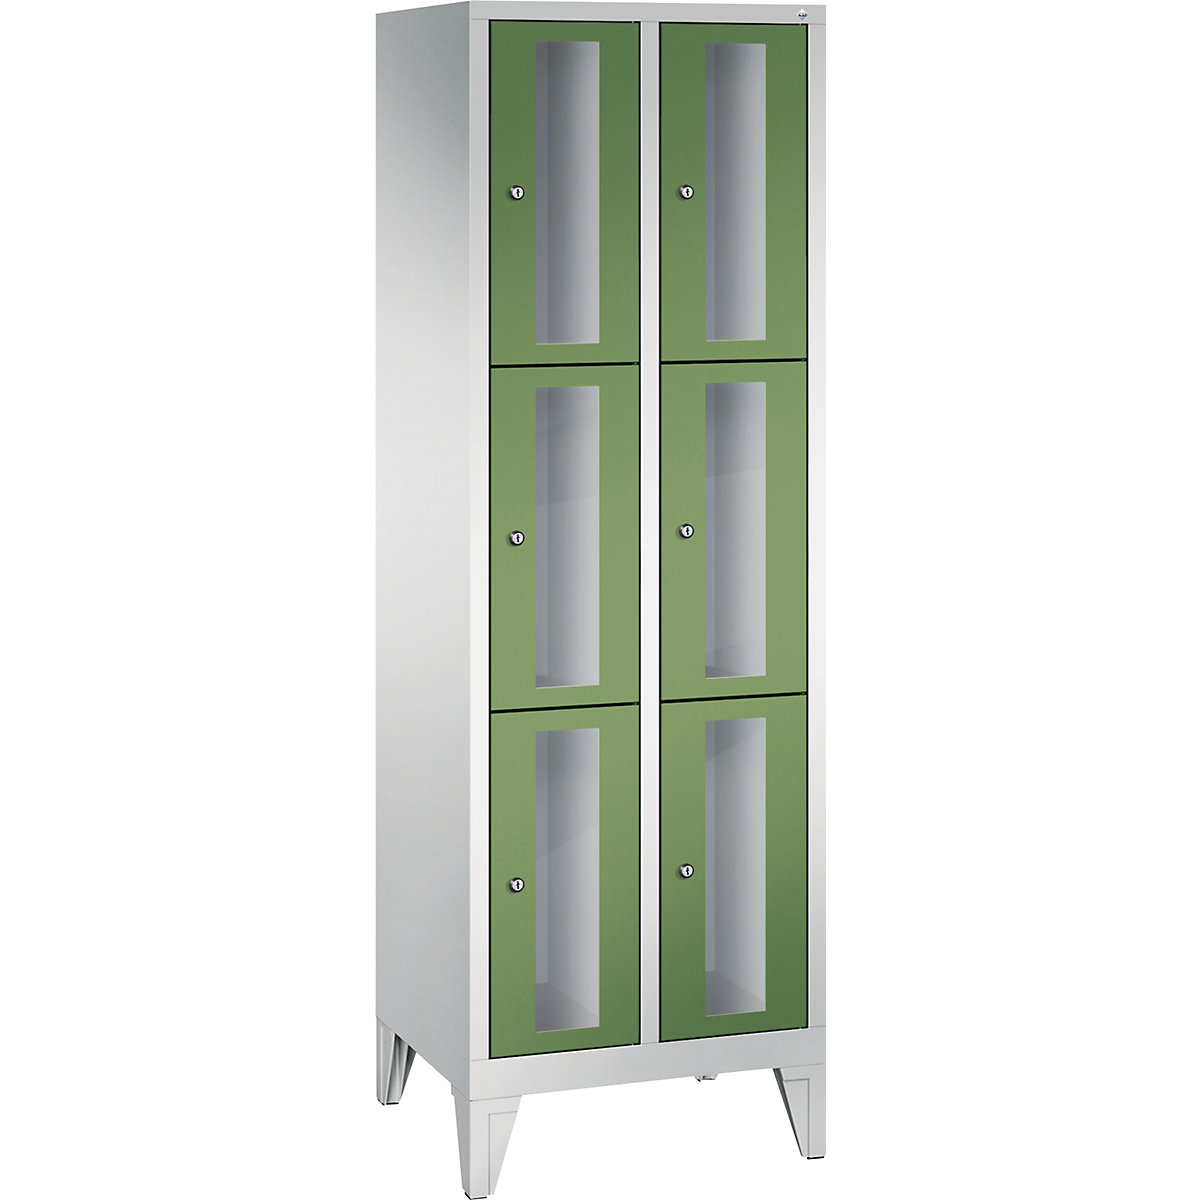 CLASSIC locker unit, compartment height 510 mm, with feet – C+P